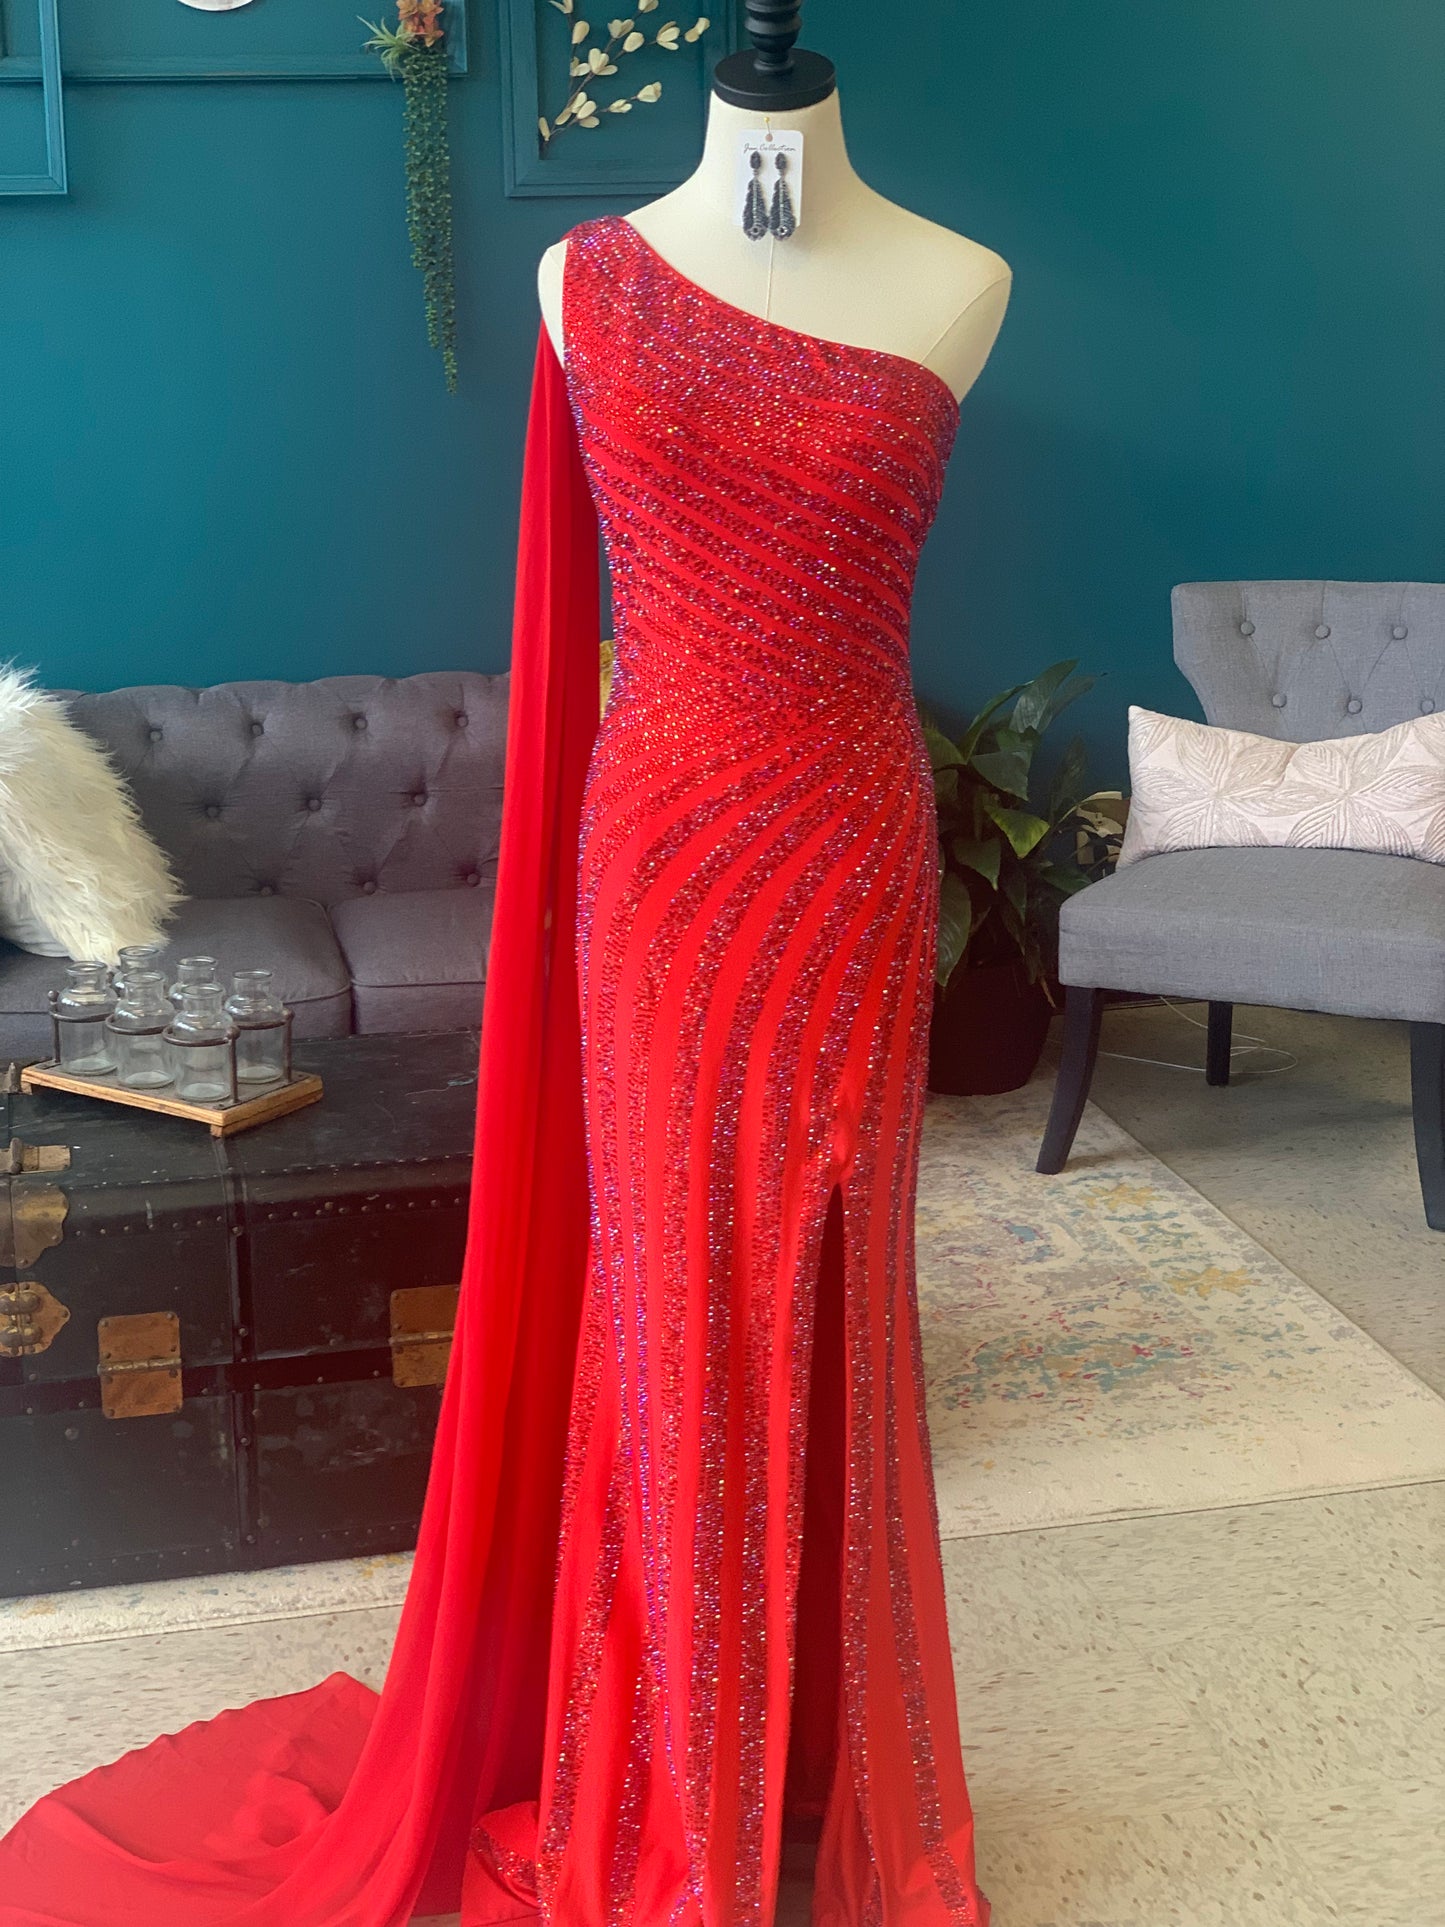 Lady in Red Gown